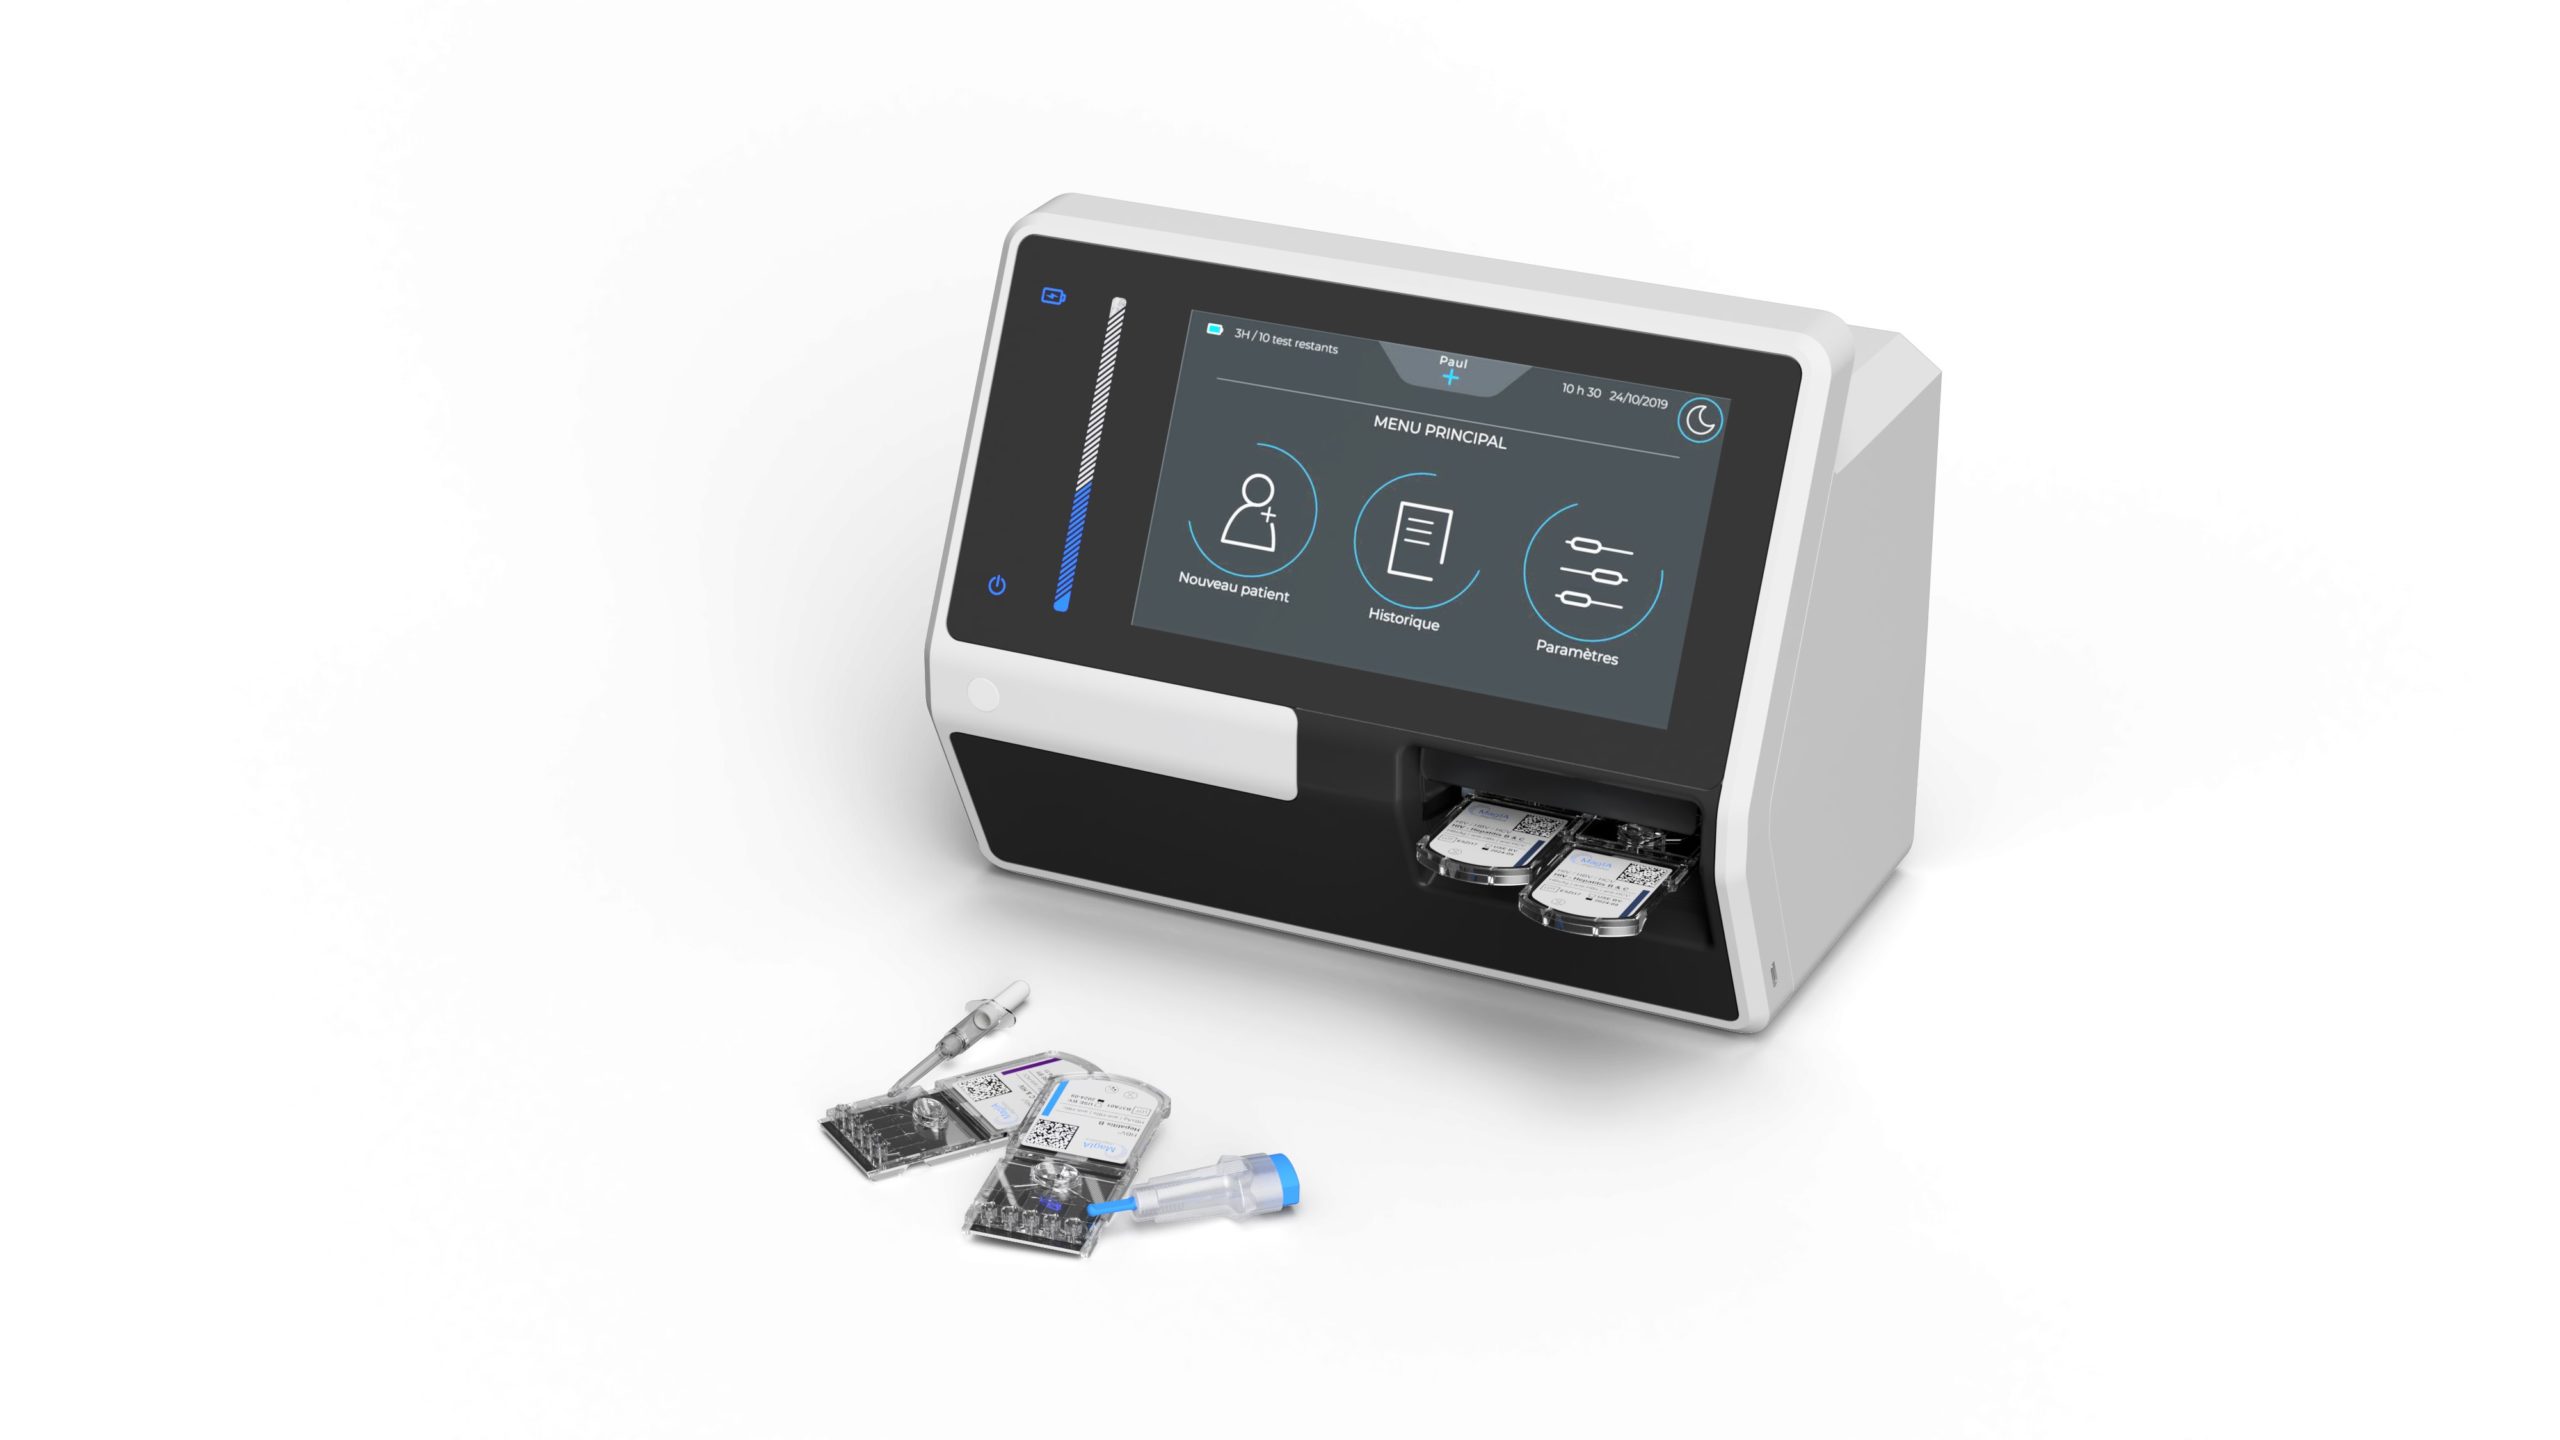 HIV and Viral Hepatitis Screening made easier thanks to MagIA diagnostics